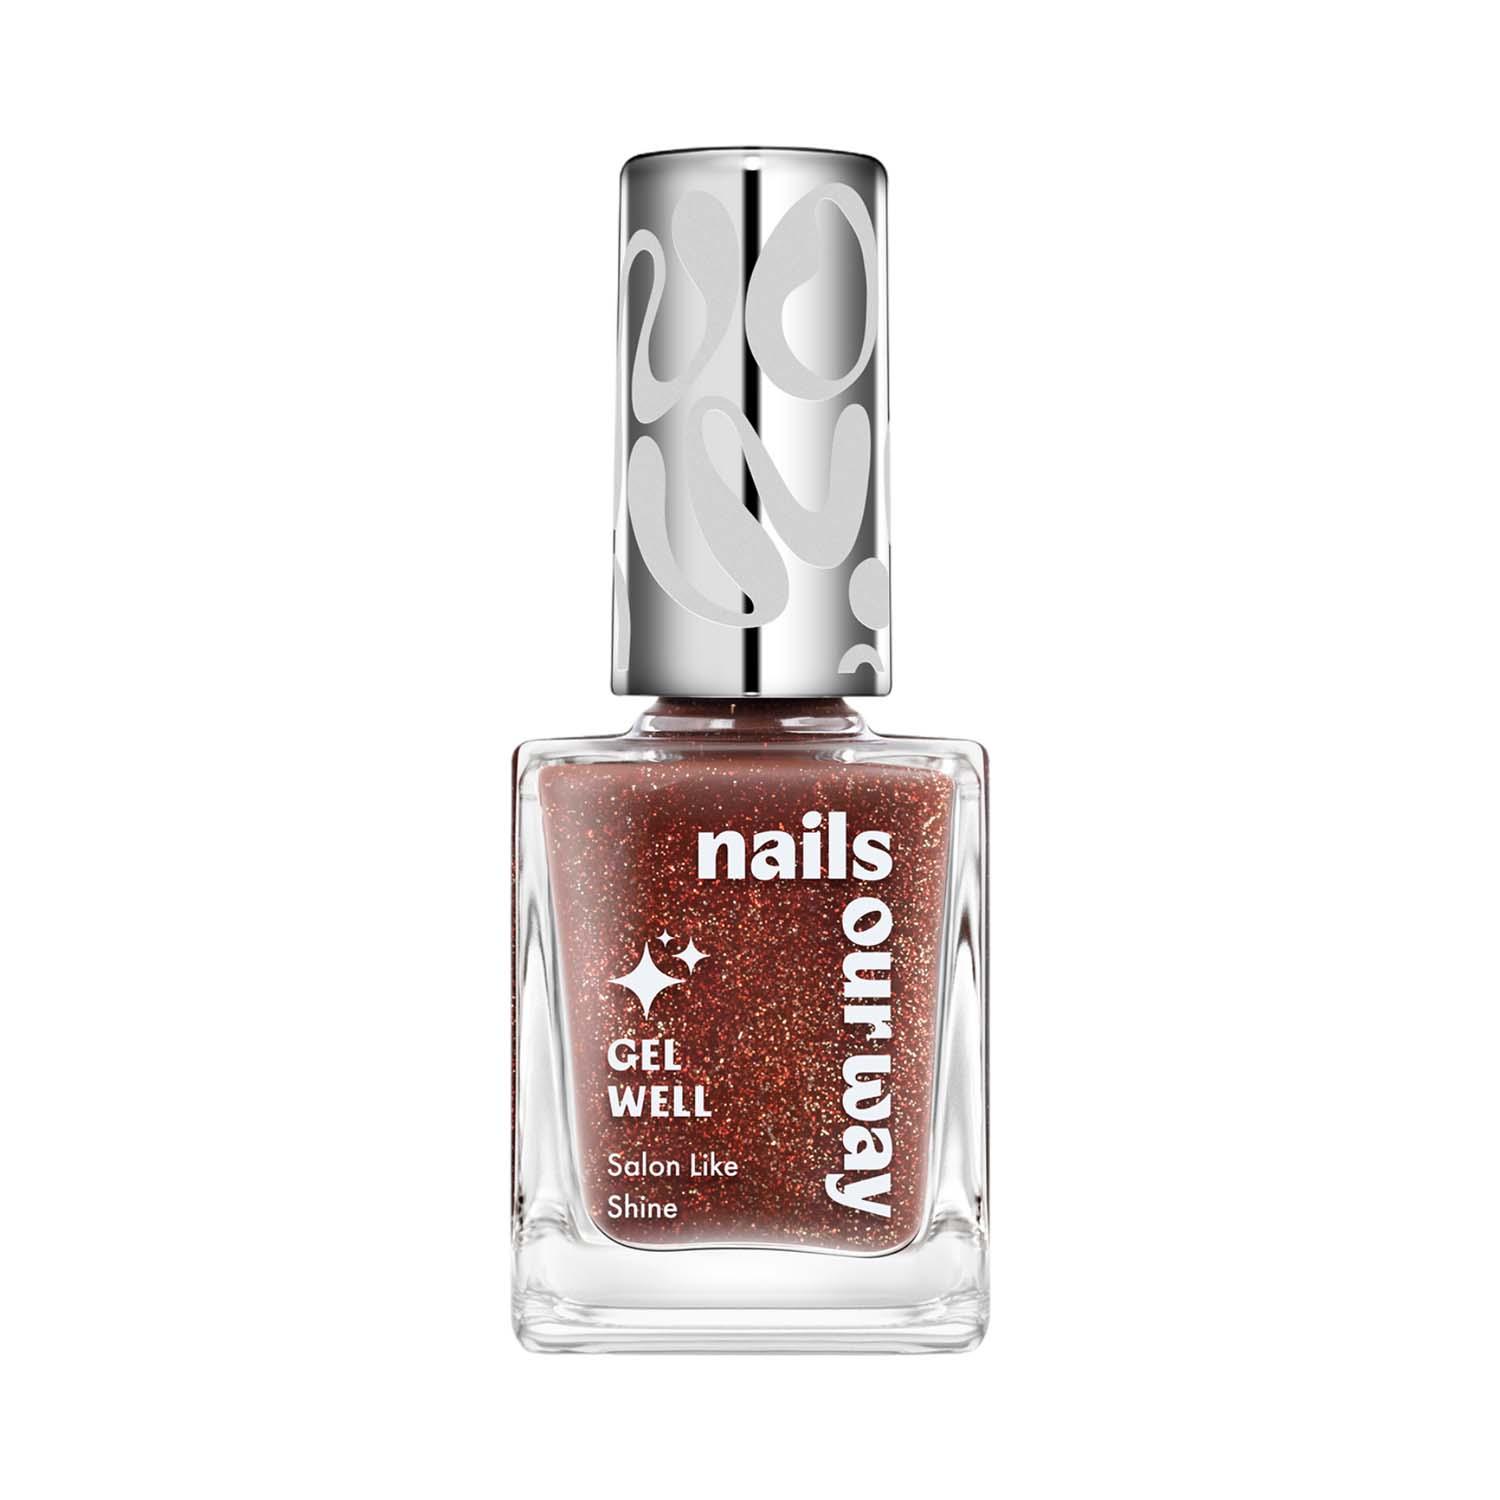 Nails Our Way | Nails Our Way Gel Well Nail Enamel - 506 Irresistible (10 ml)